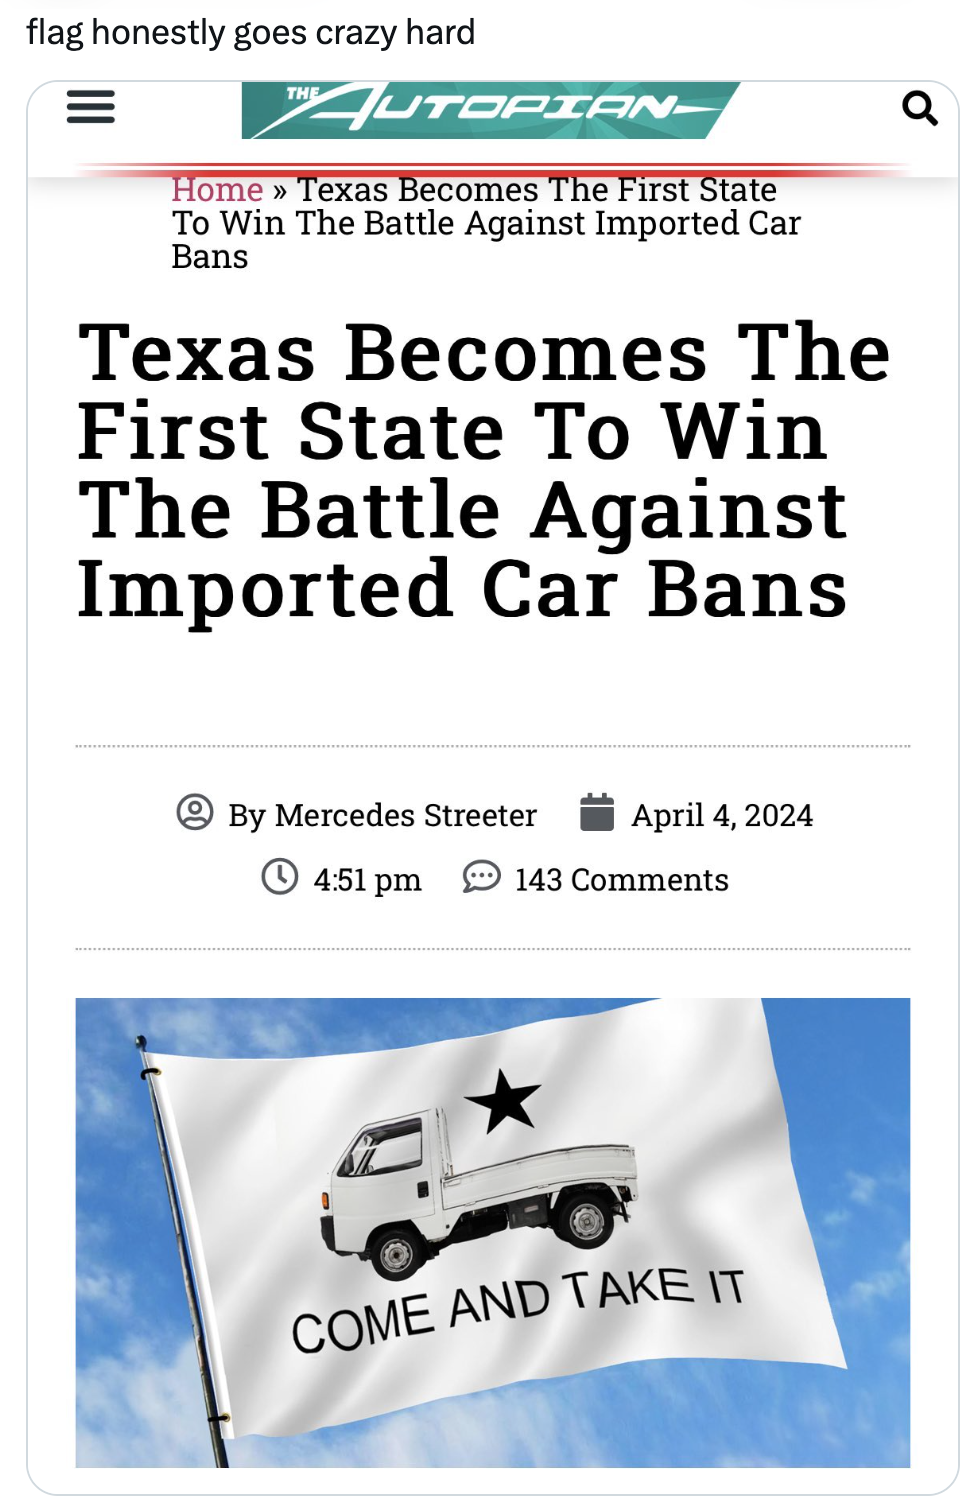 document - flag honestly goes crazy hard Autopian Home Texas Becomes The First State To Win The Battle Against Imported Car Bans Texas Becomes The First State To Win The Battle Against Imported Car Bans By Mercedes Streeter 143 Come And Take It